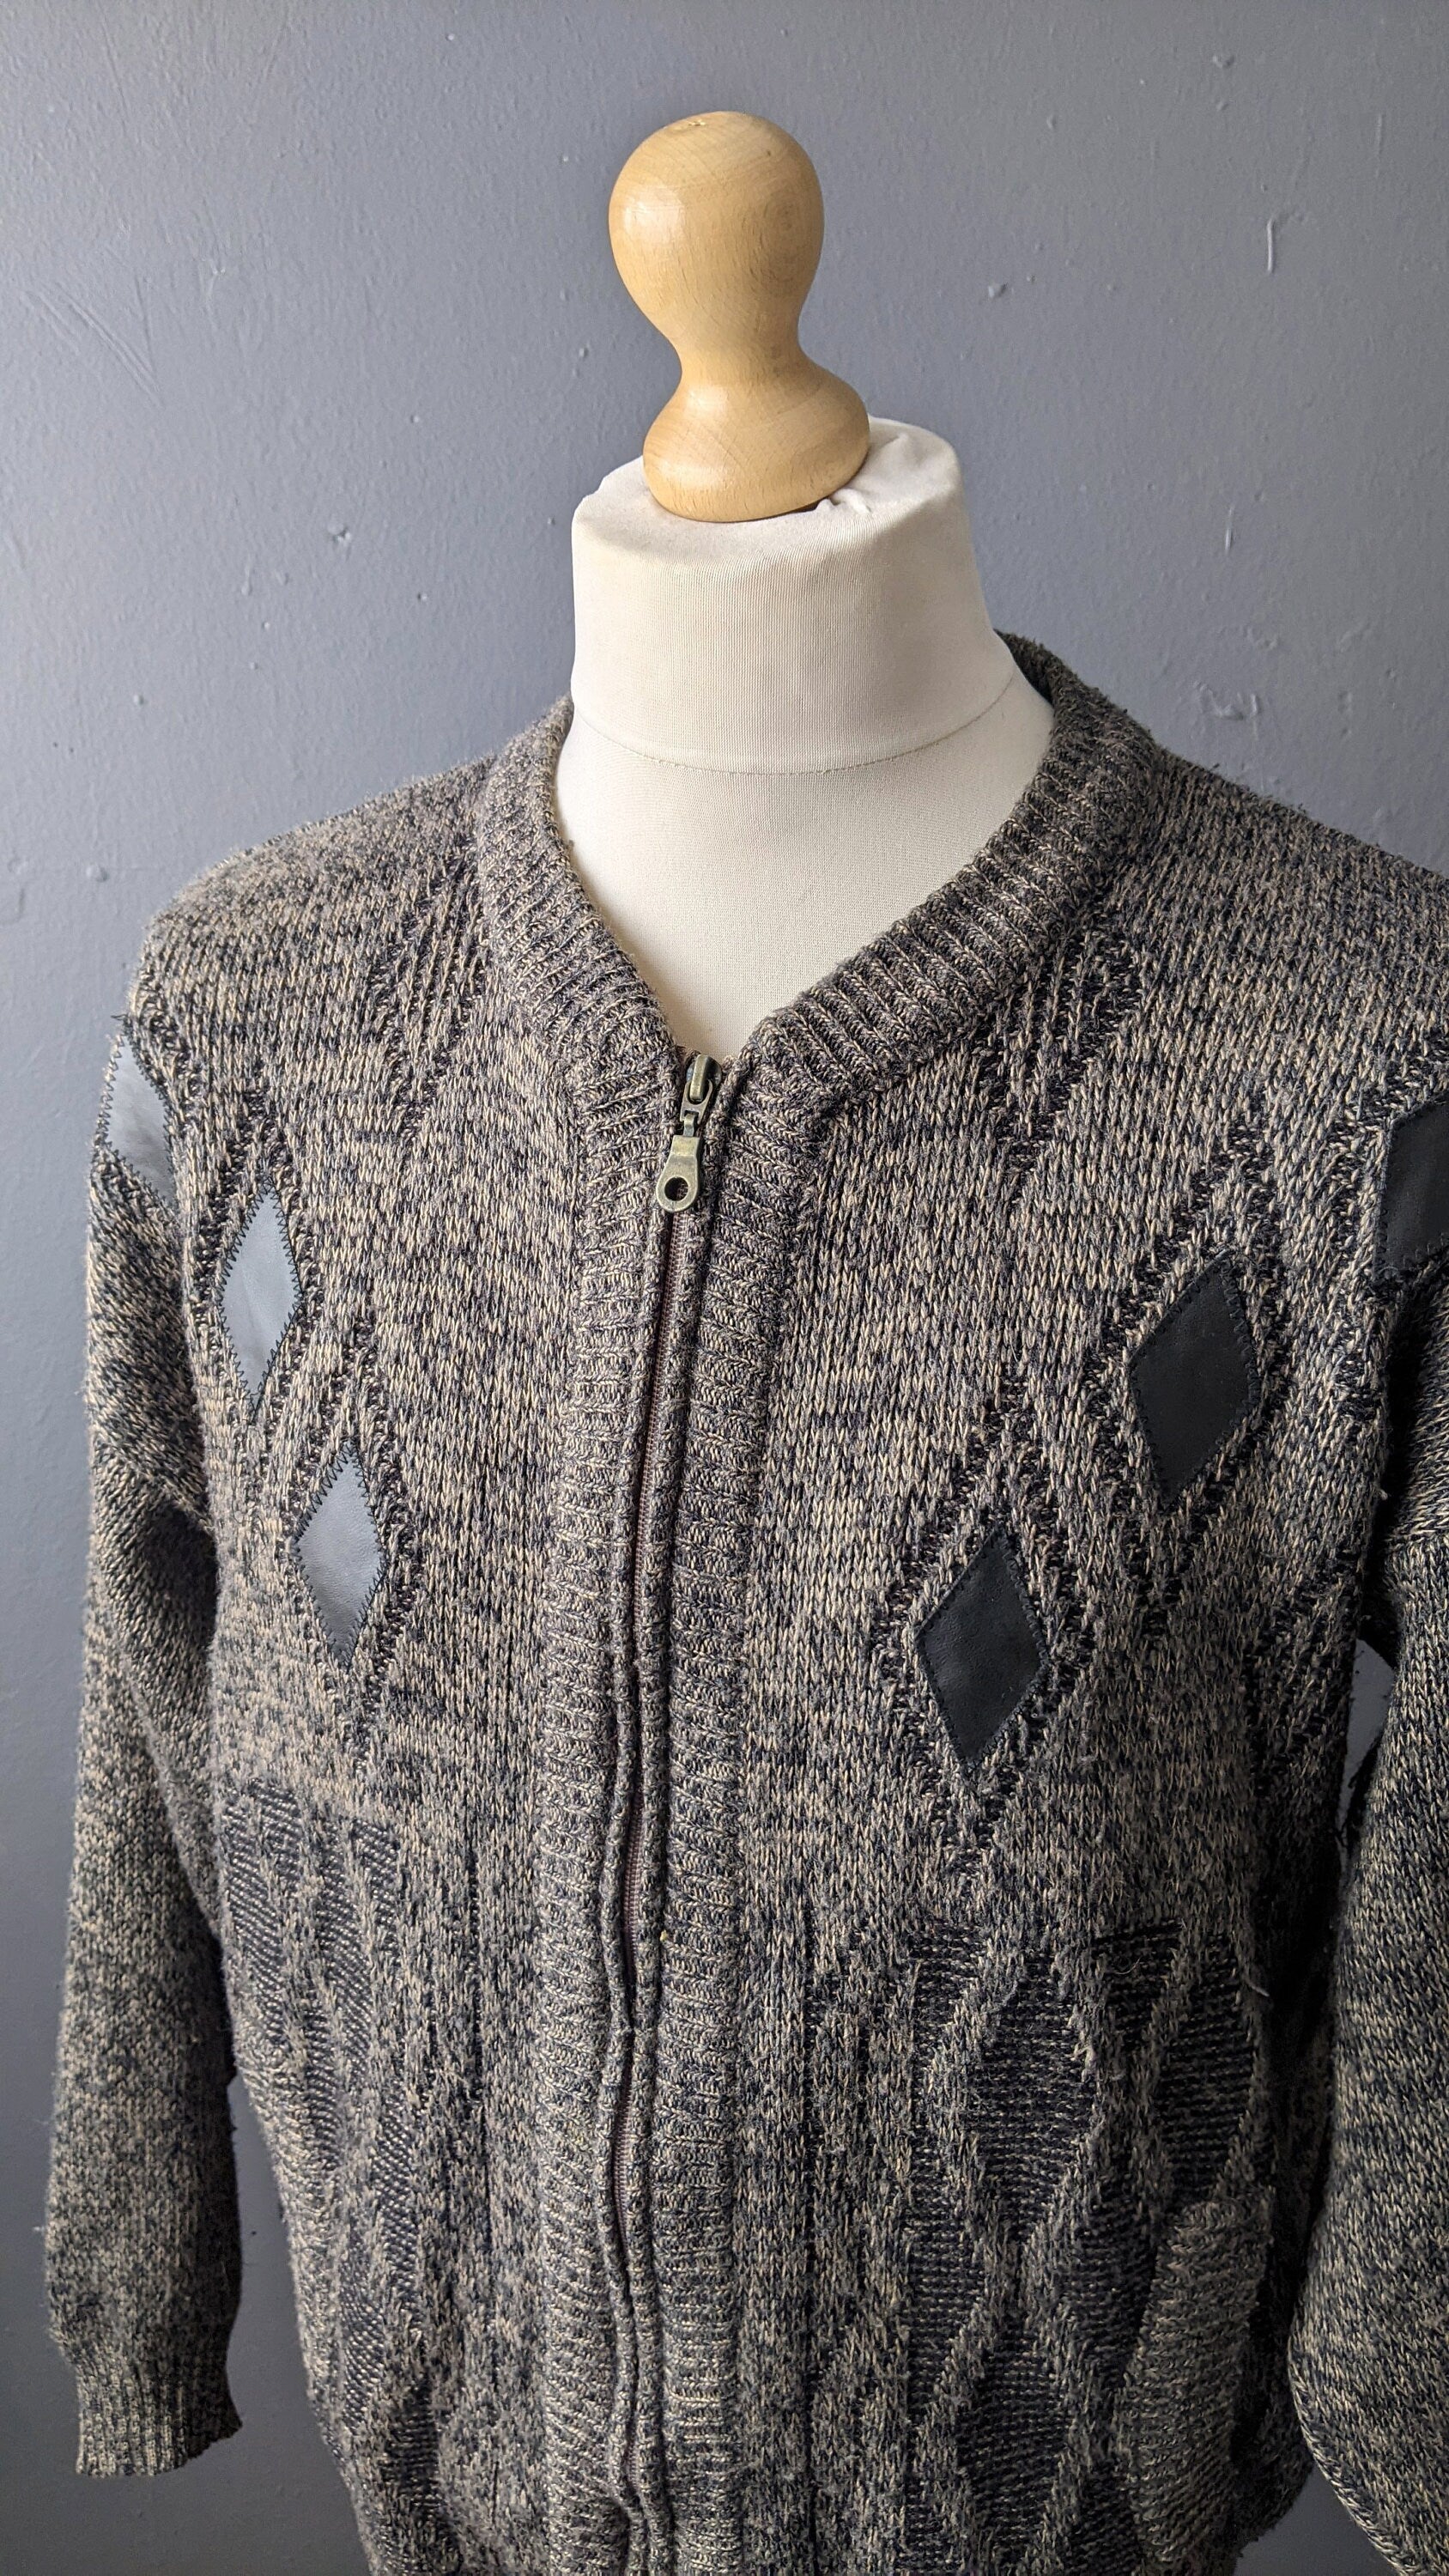 80s Mens Zip Front Cardigan with Diamond Leatherette Patches, Grandpa Knitwear, Size Large 46 Chest